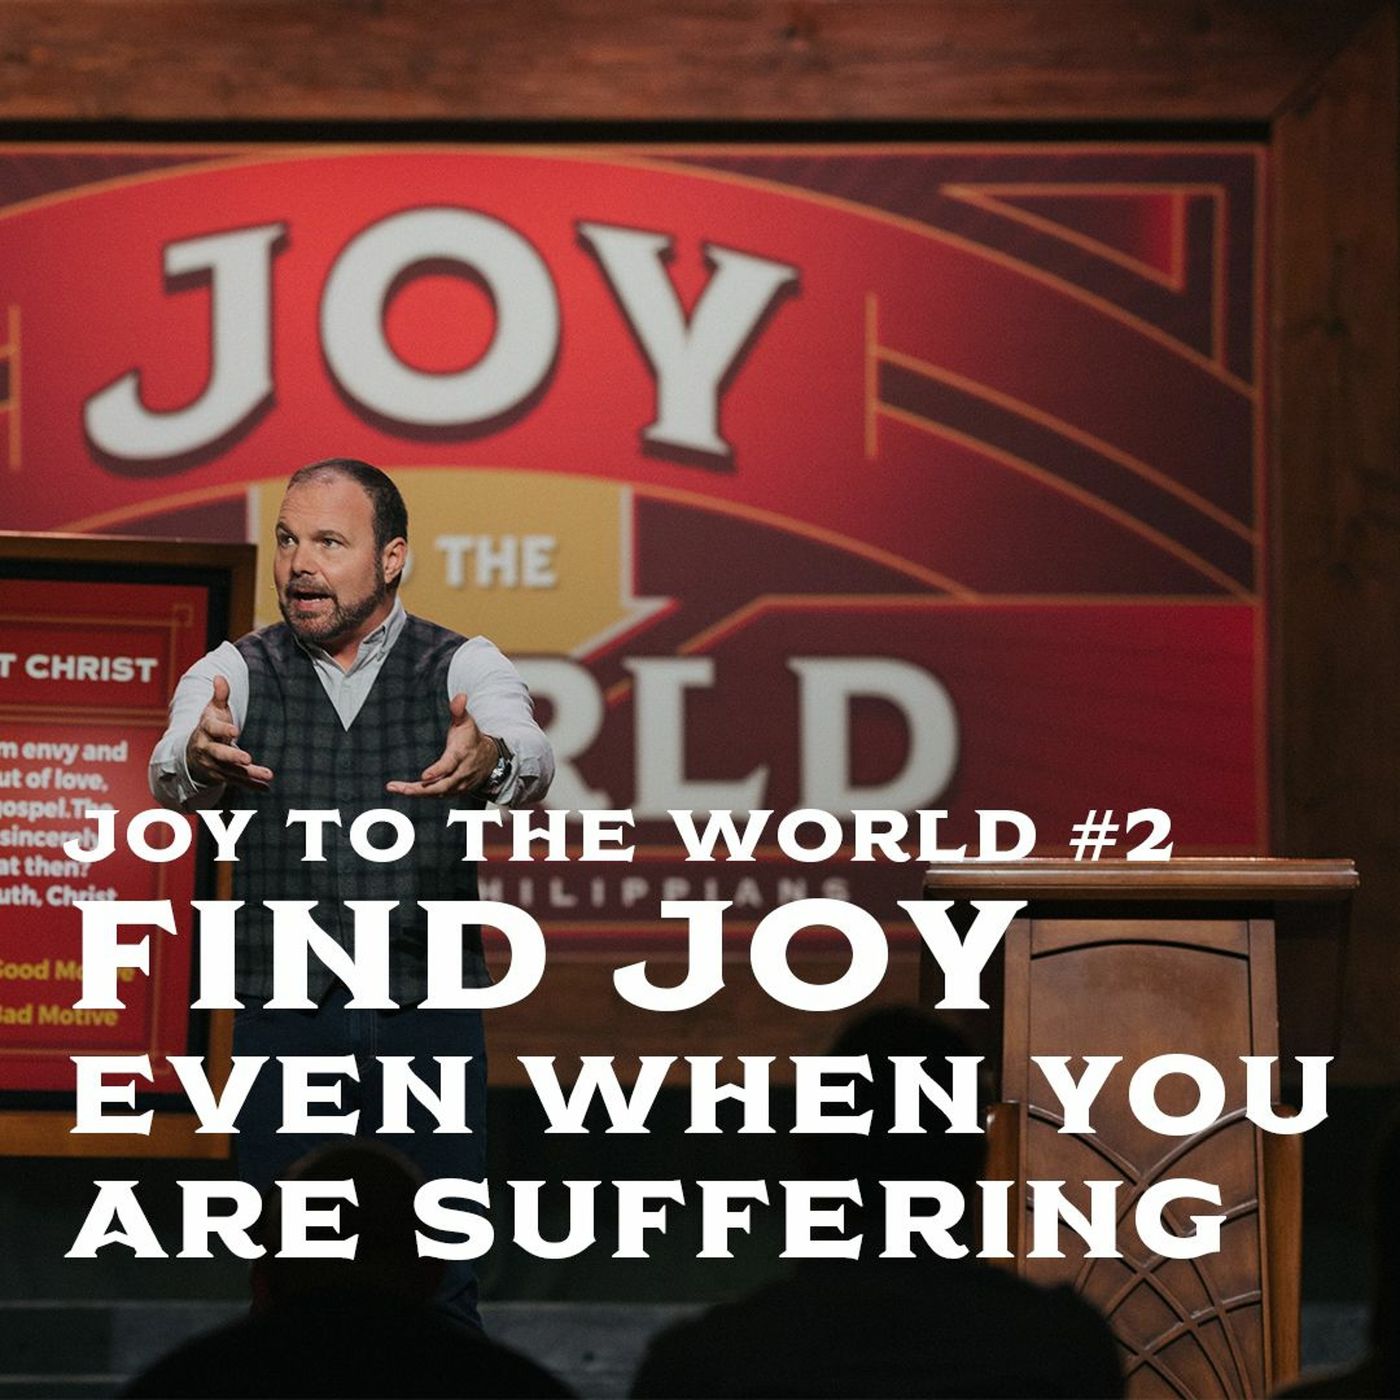 Joy To The World #2 - Find Joy Even When You Are Suffering